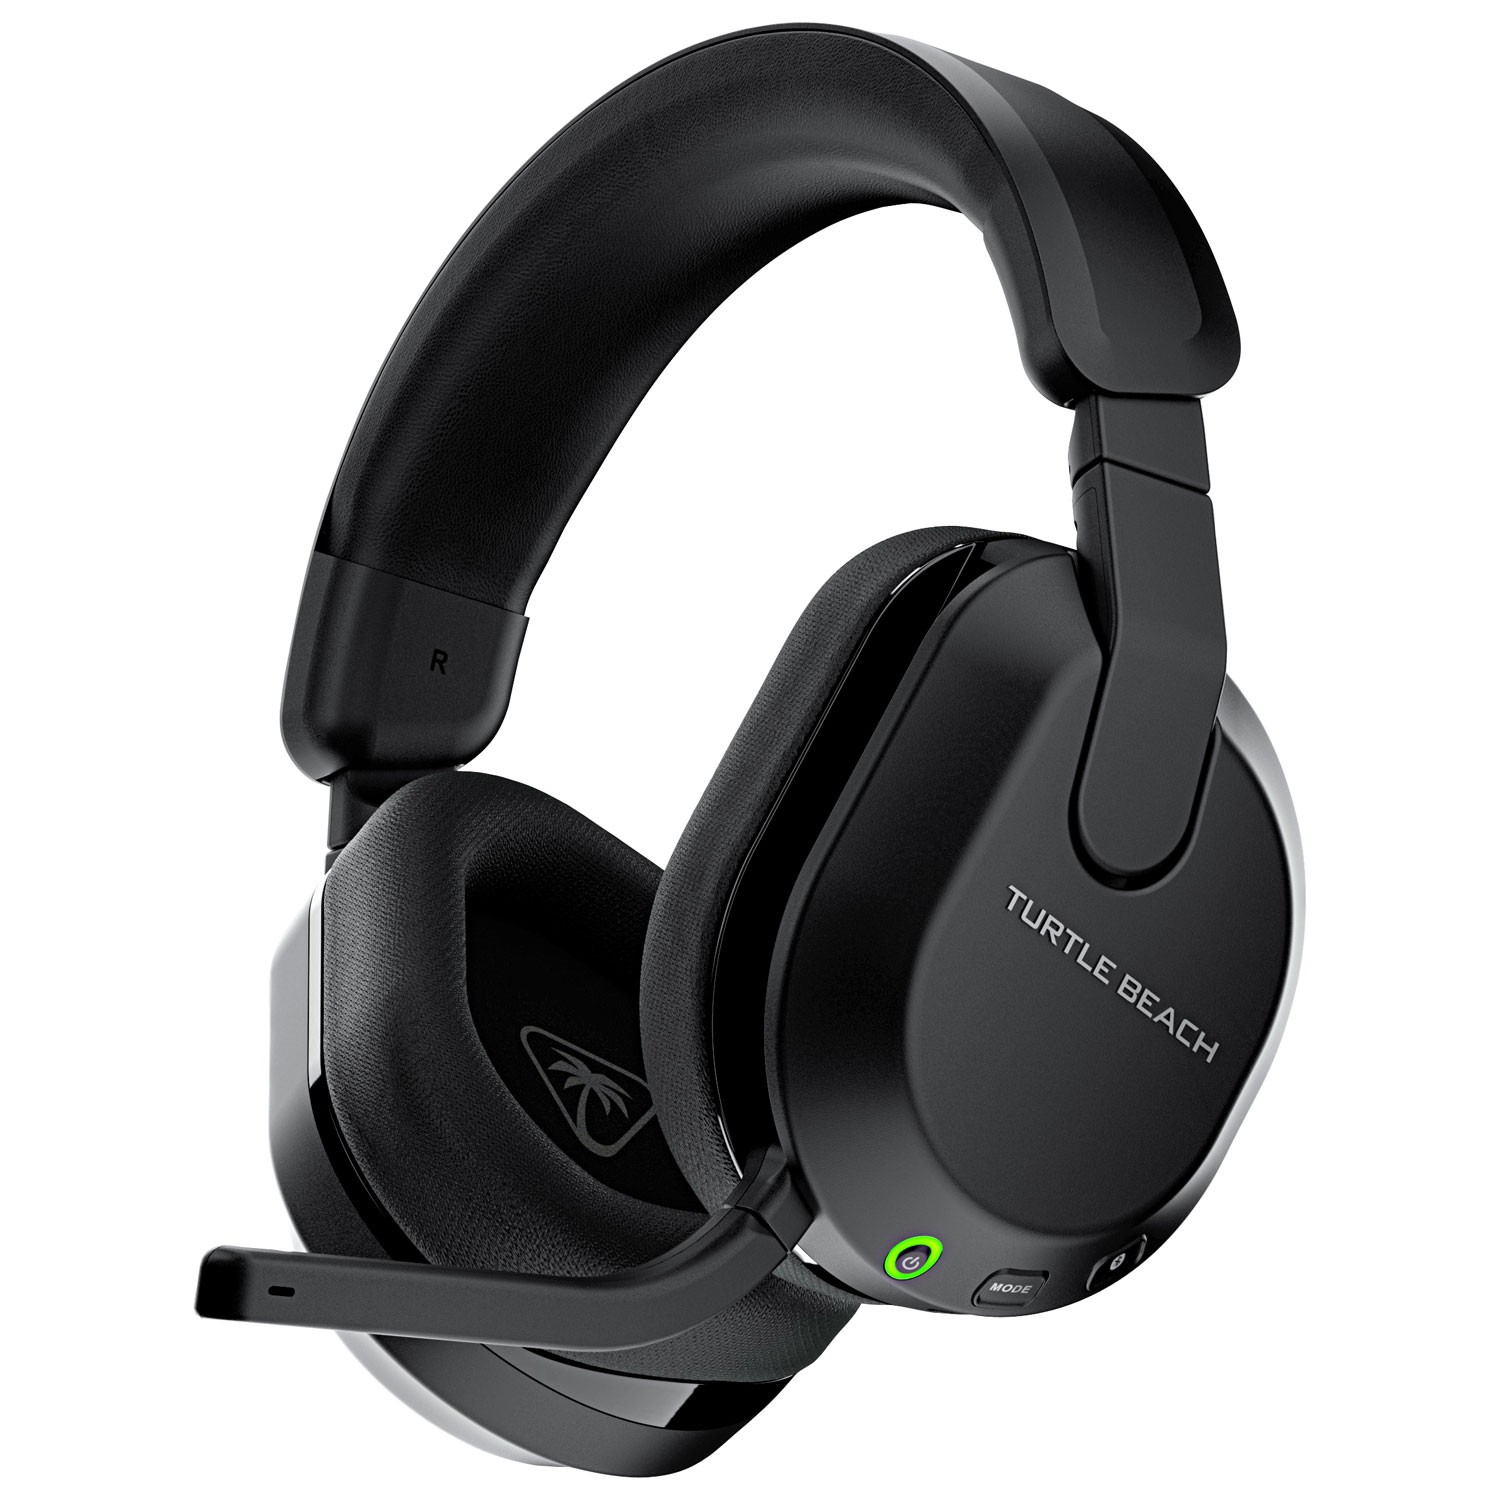 Turtle Beach Stealth 600P Gen 3 Wireless Gaming Headset for PS5/PS4 - Black